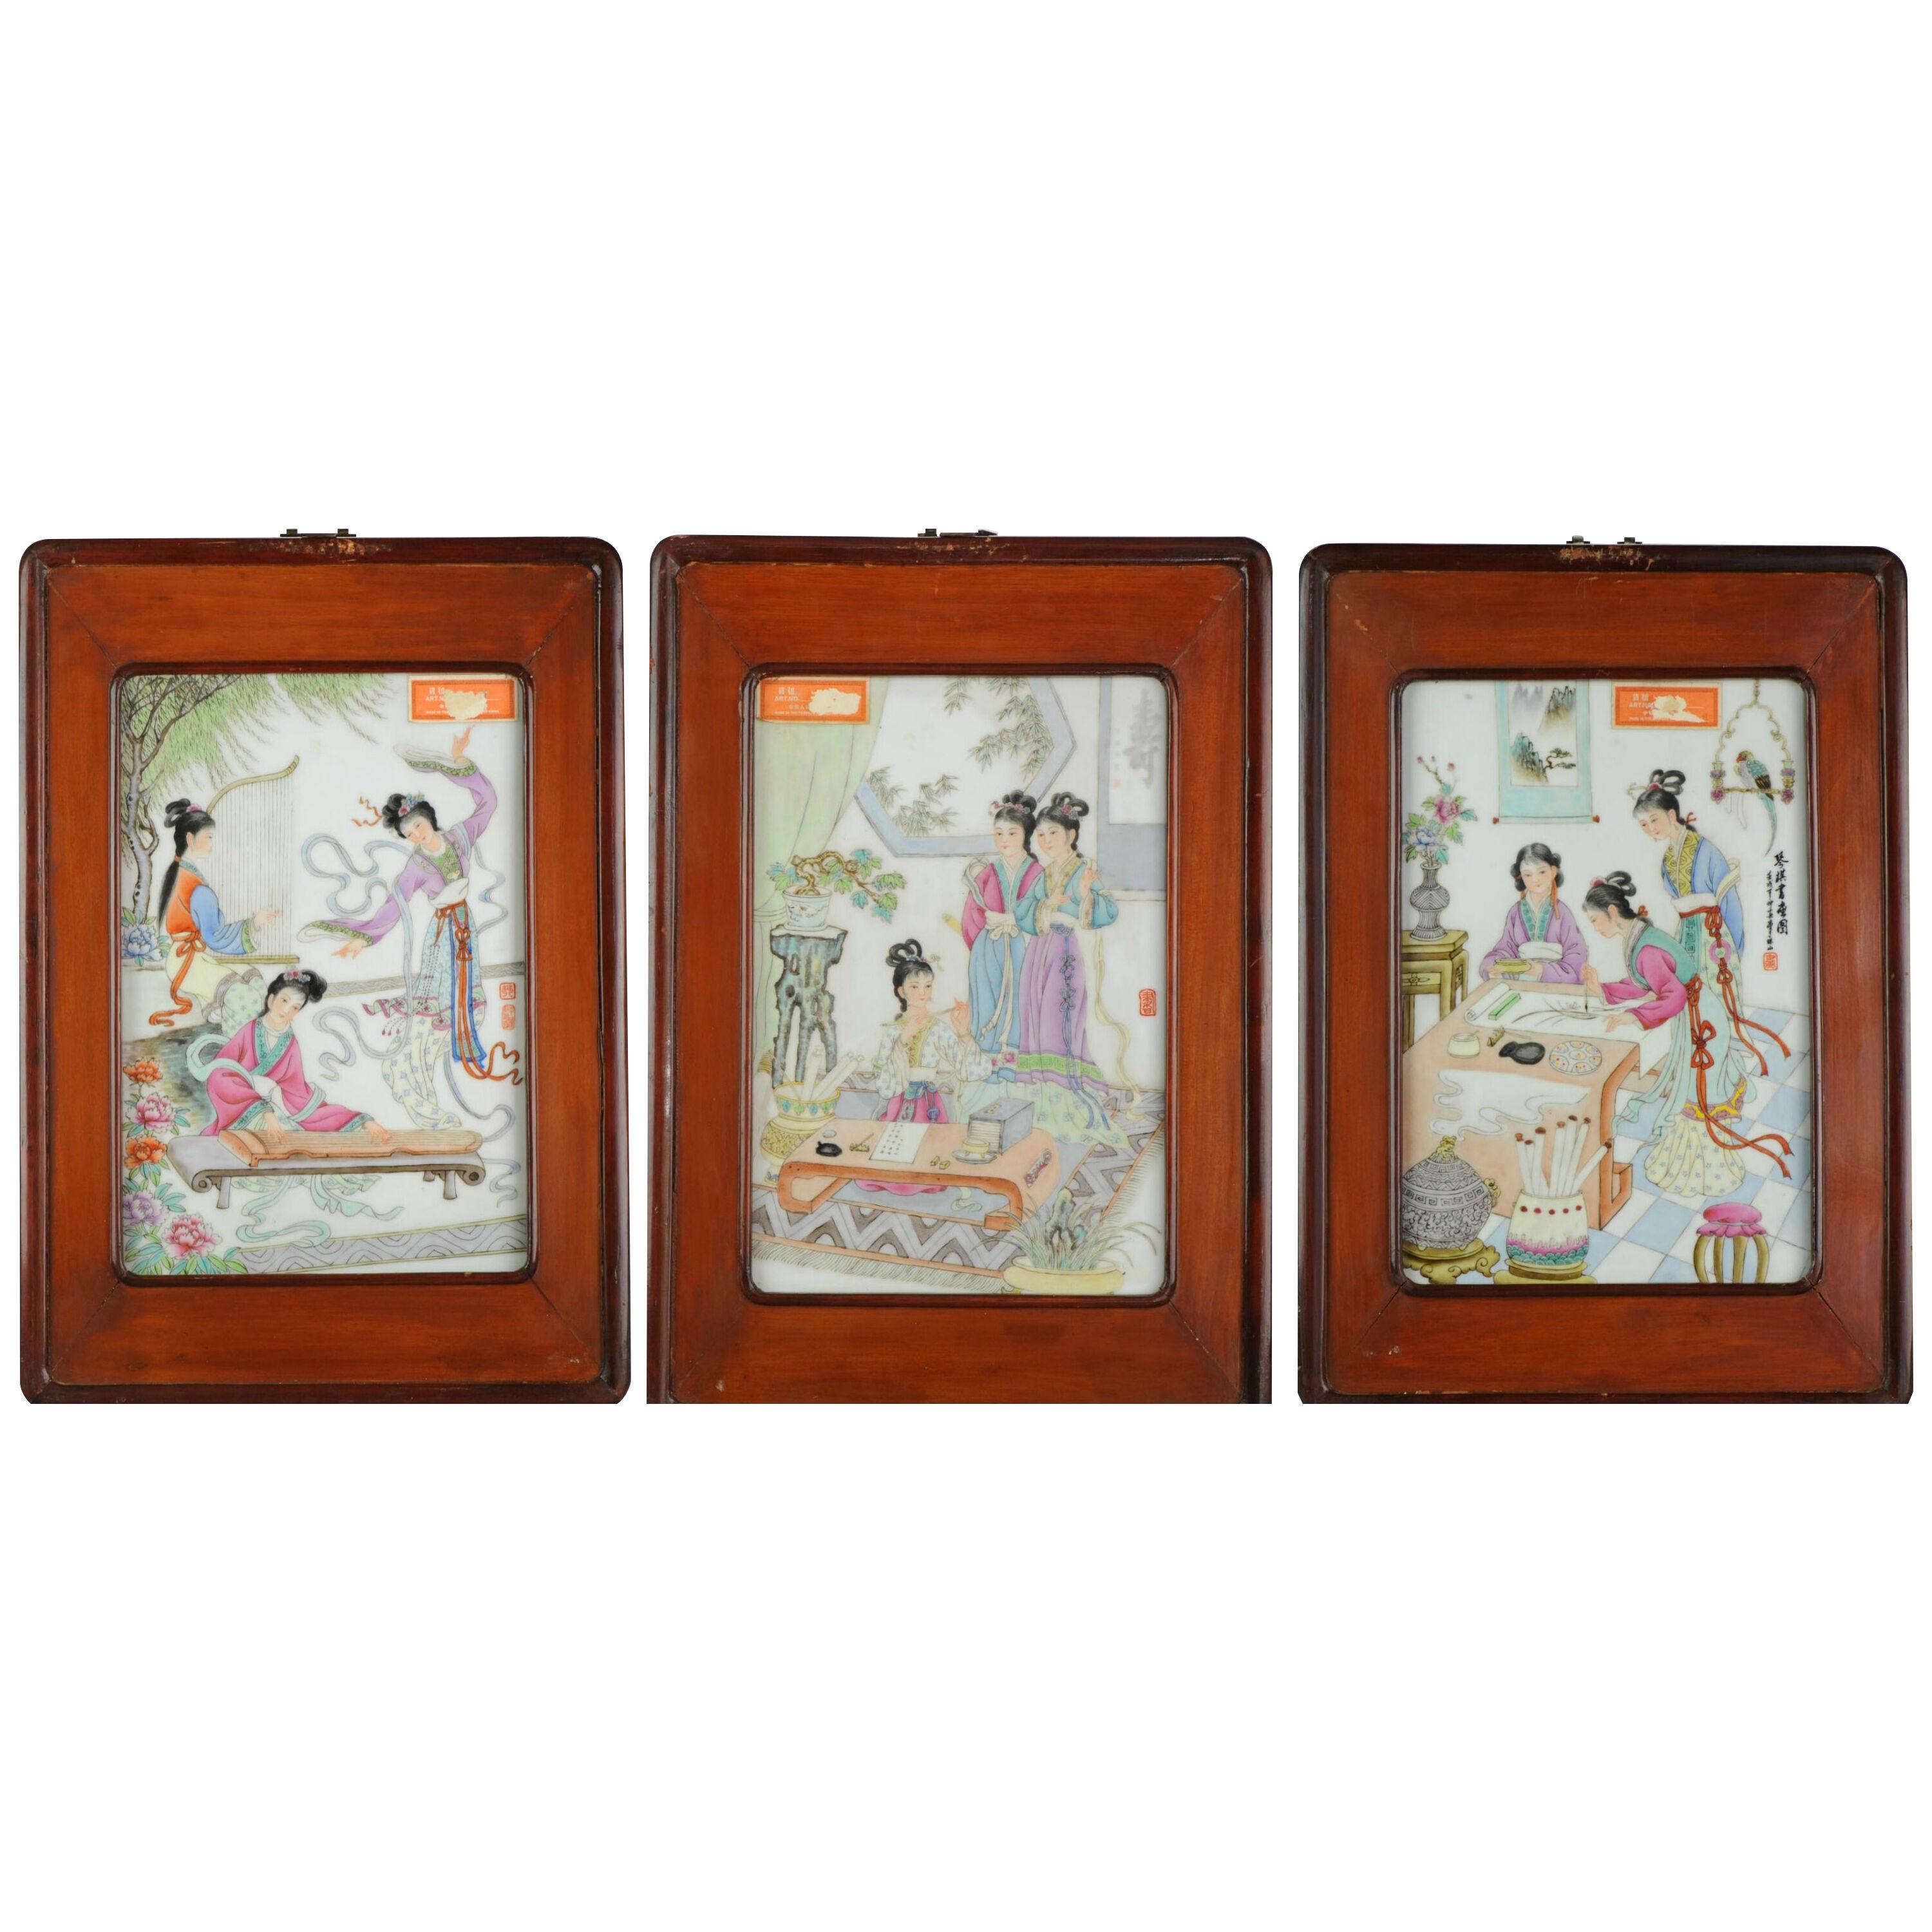 Set of 3 Chinese PRoC Ladies Leisure Porcelain plaques 1970's or 1980's